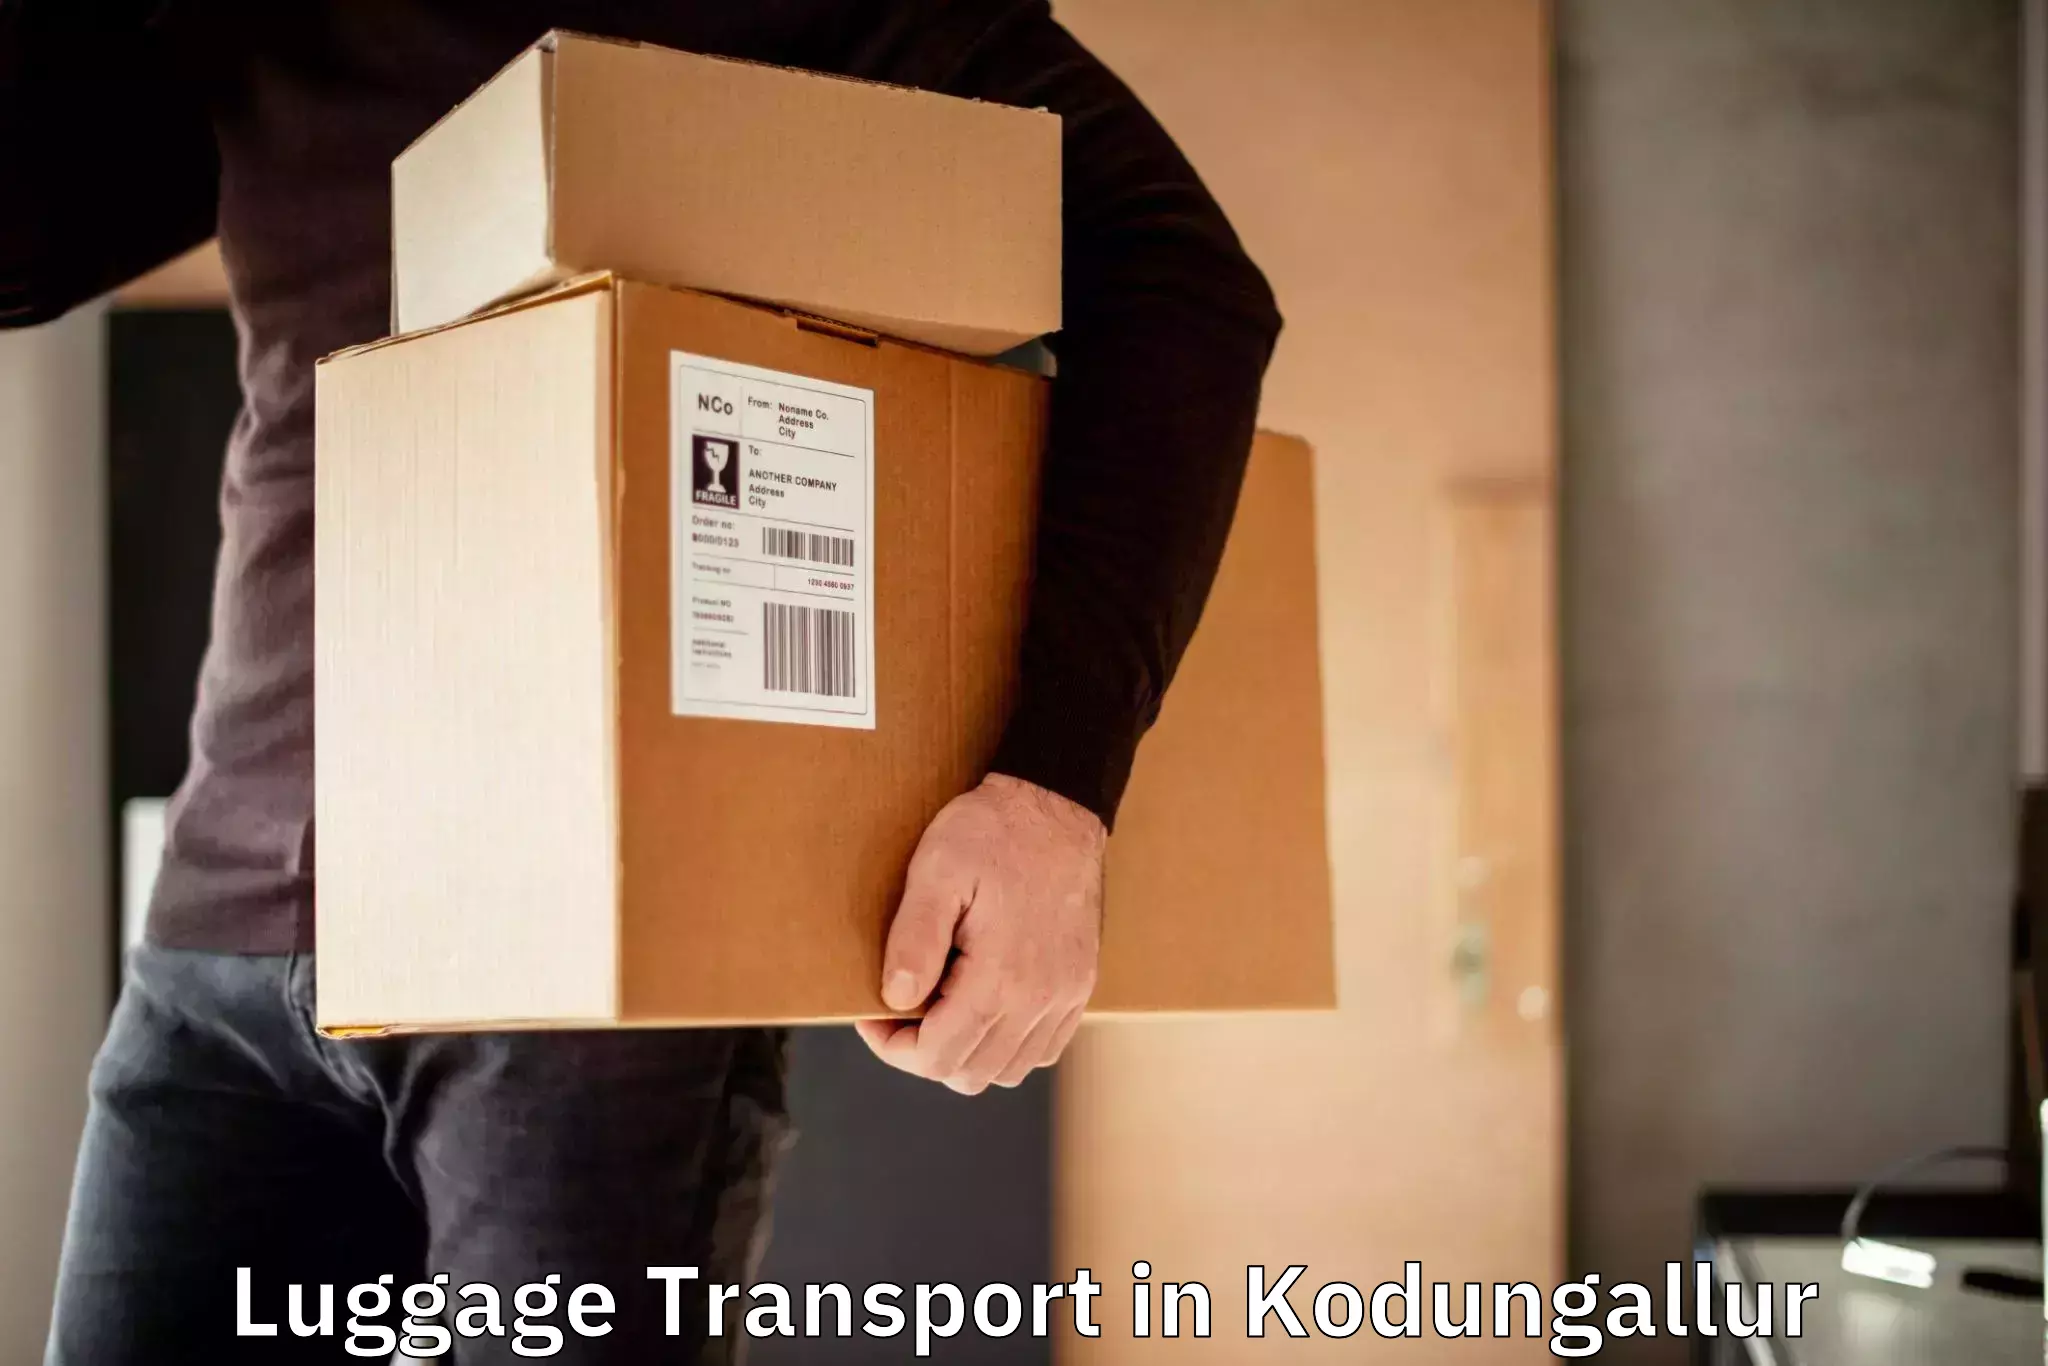 Luggage shipping management in Kodungallur